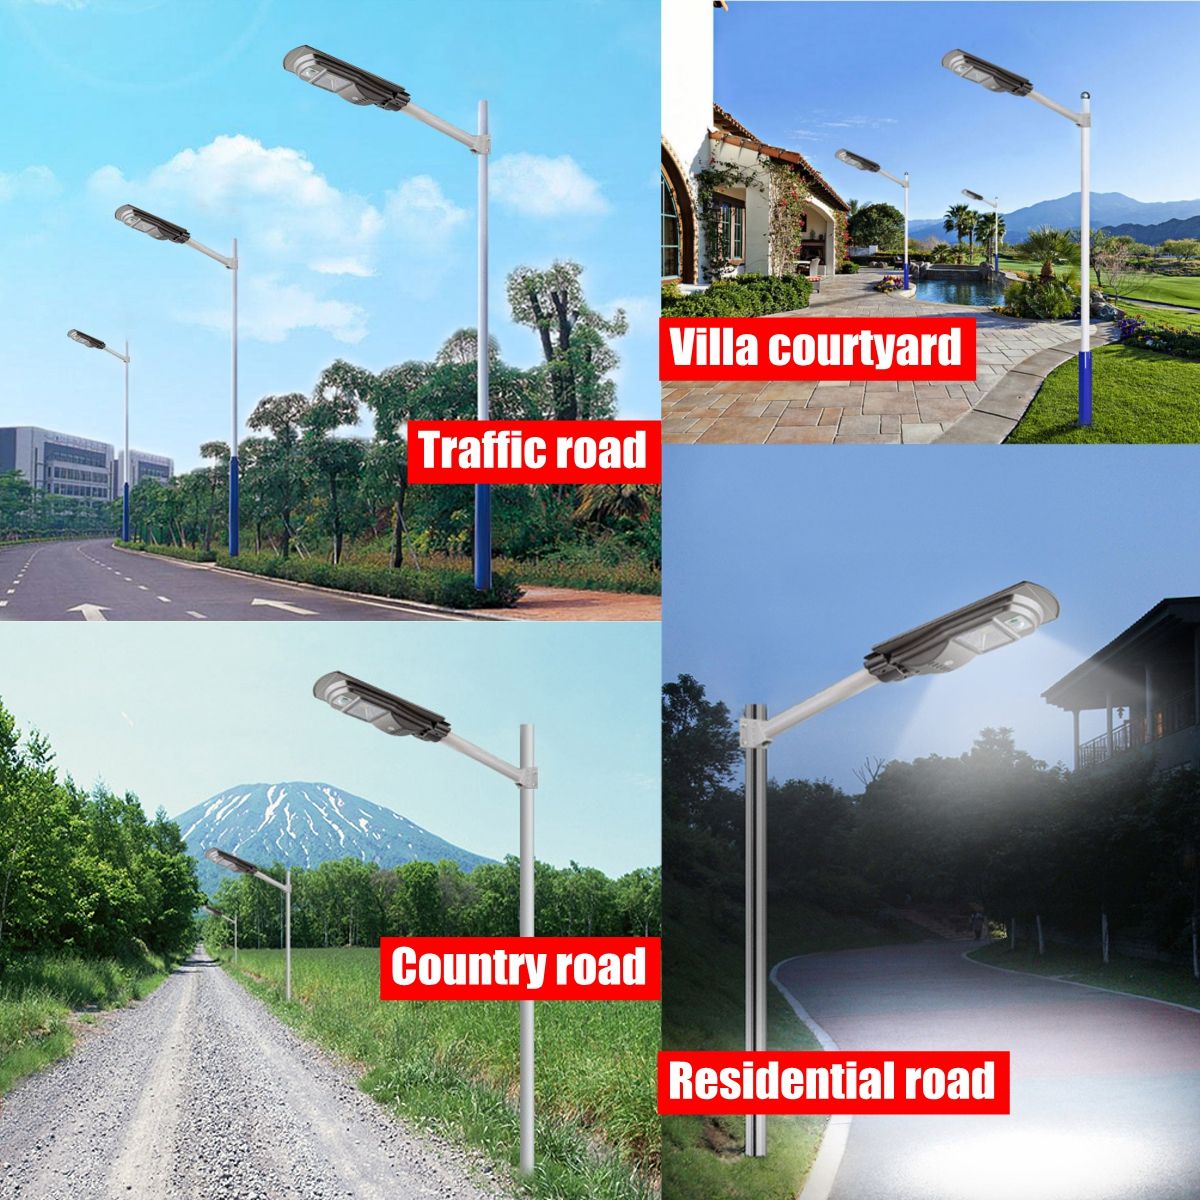 117234351-LED-Solar-Wall-Street-Light-PIR-Motion-Sensor-Outdoor-Lamp-with-Remote-Controller-1694433